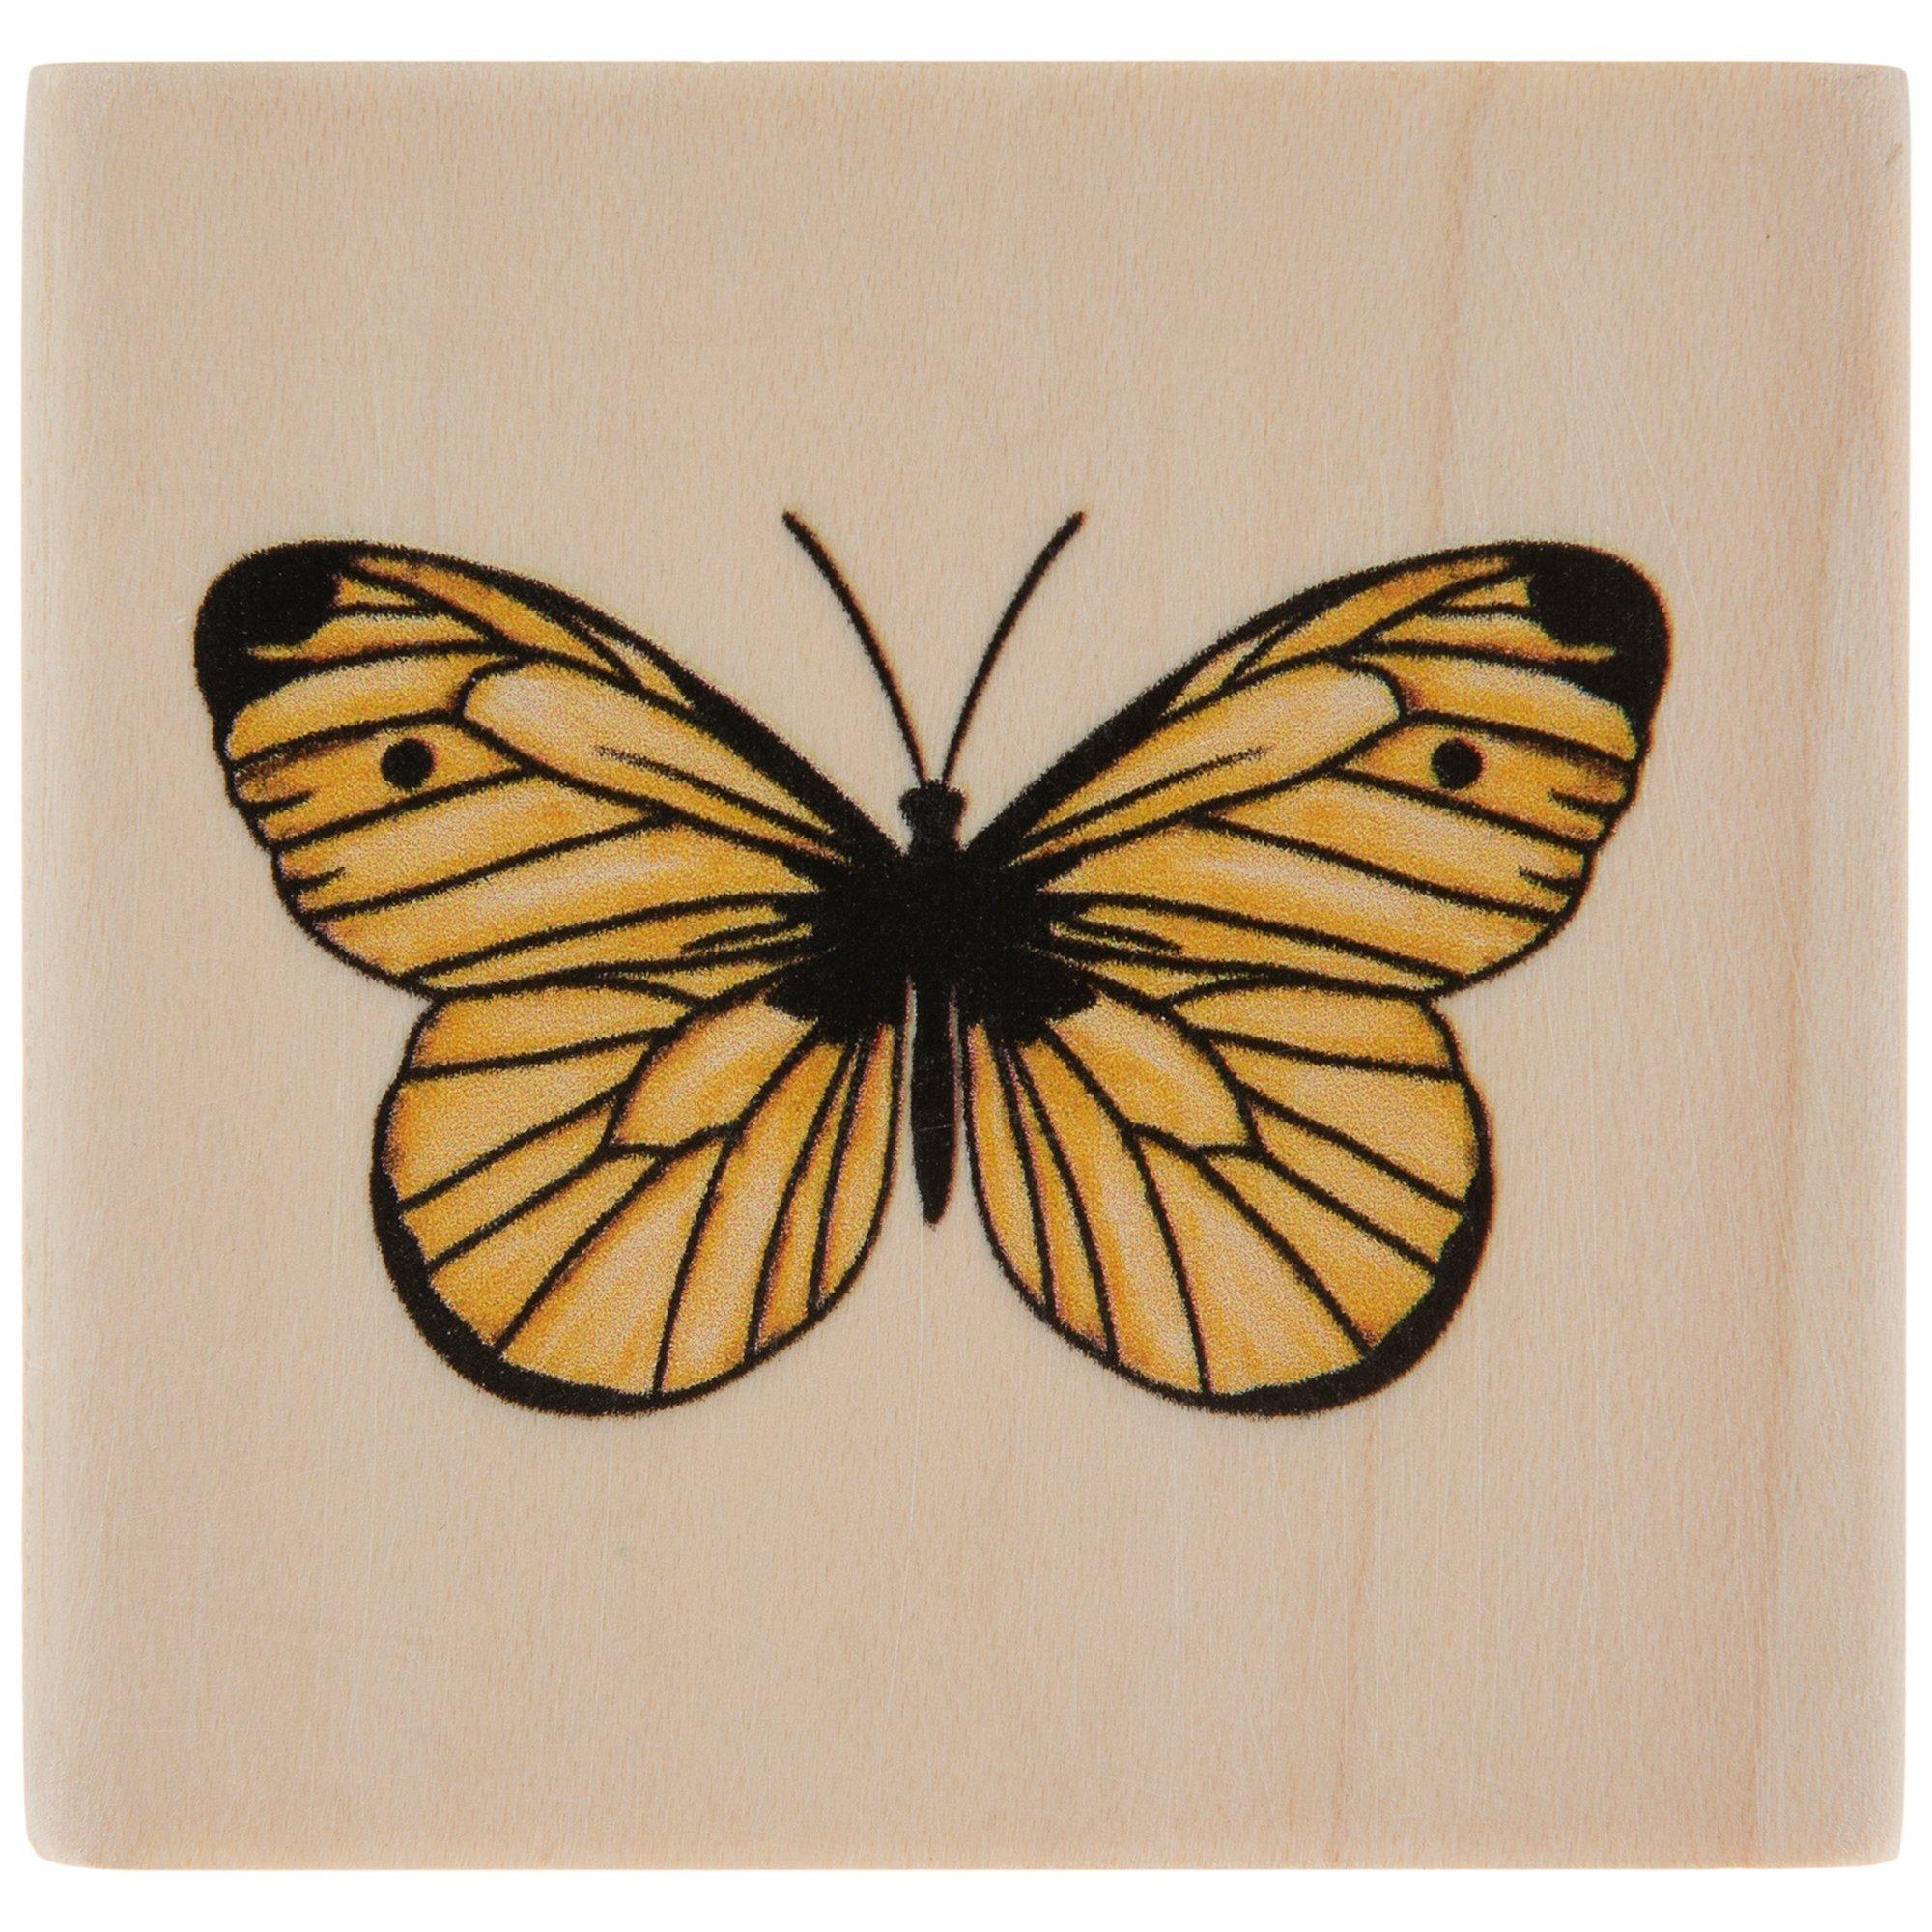 Ready Made Rubber Stamp - Butterfly Themed Wooden Rubber Stamps (12 Designs)